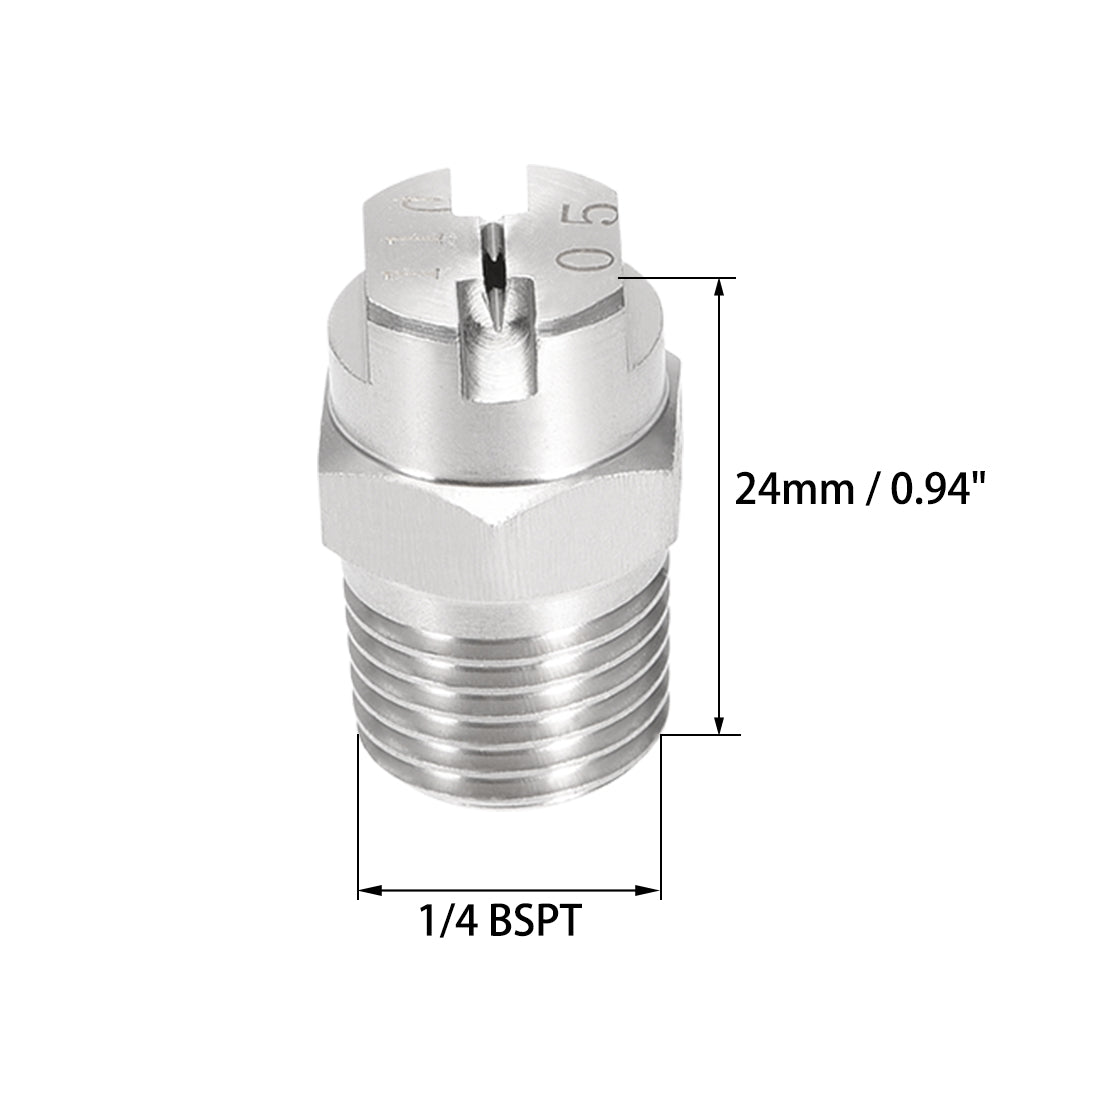 Uxcell Uxcell Flat Fan Spray Tip - 1/4BSPT Male Thread 304 Stainless Steel Nozzle - 110 Degree 1.8mm Orifice Diameter - 2 Pcs